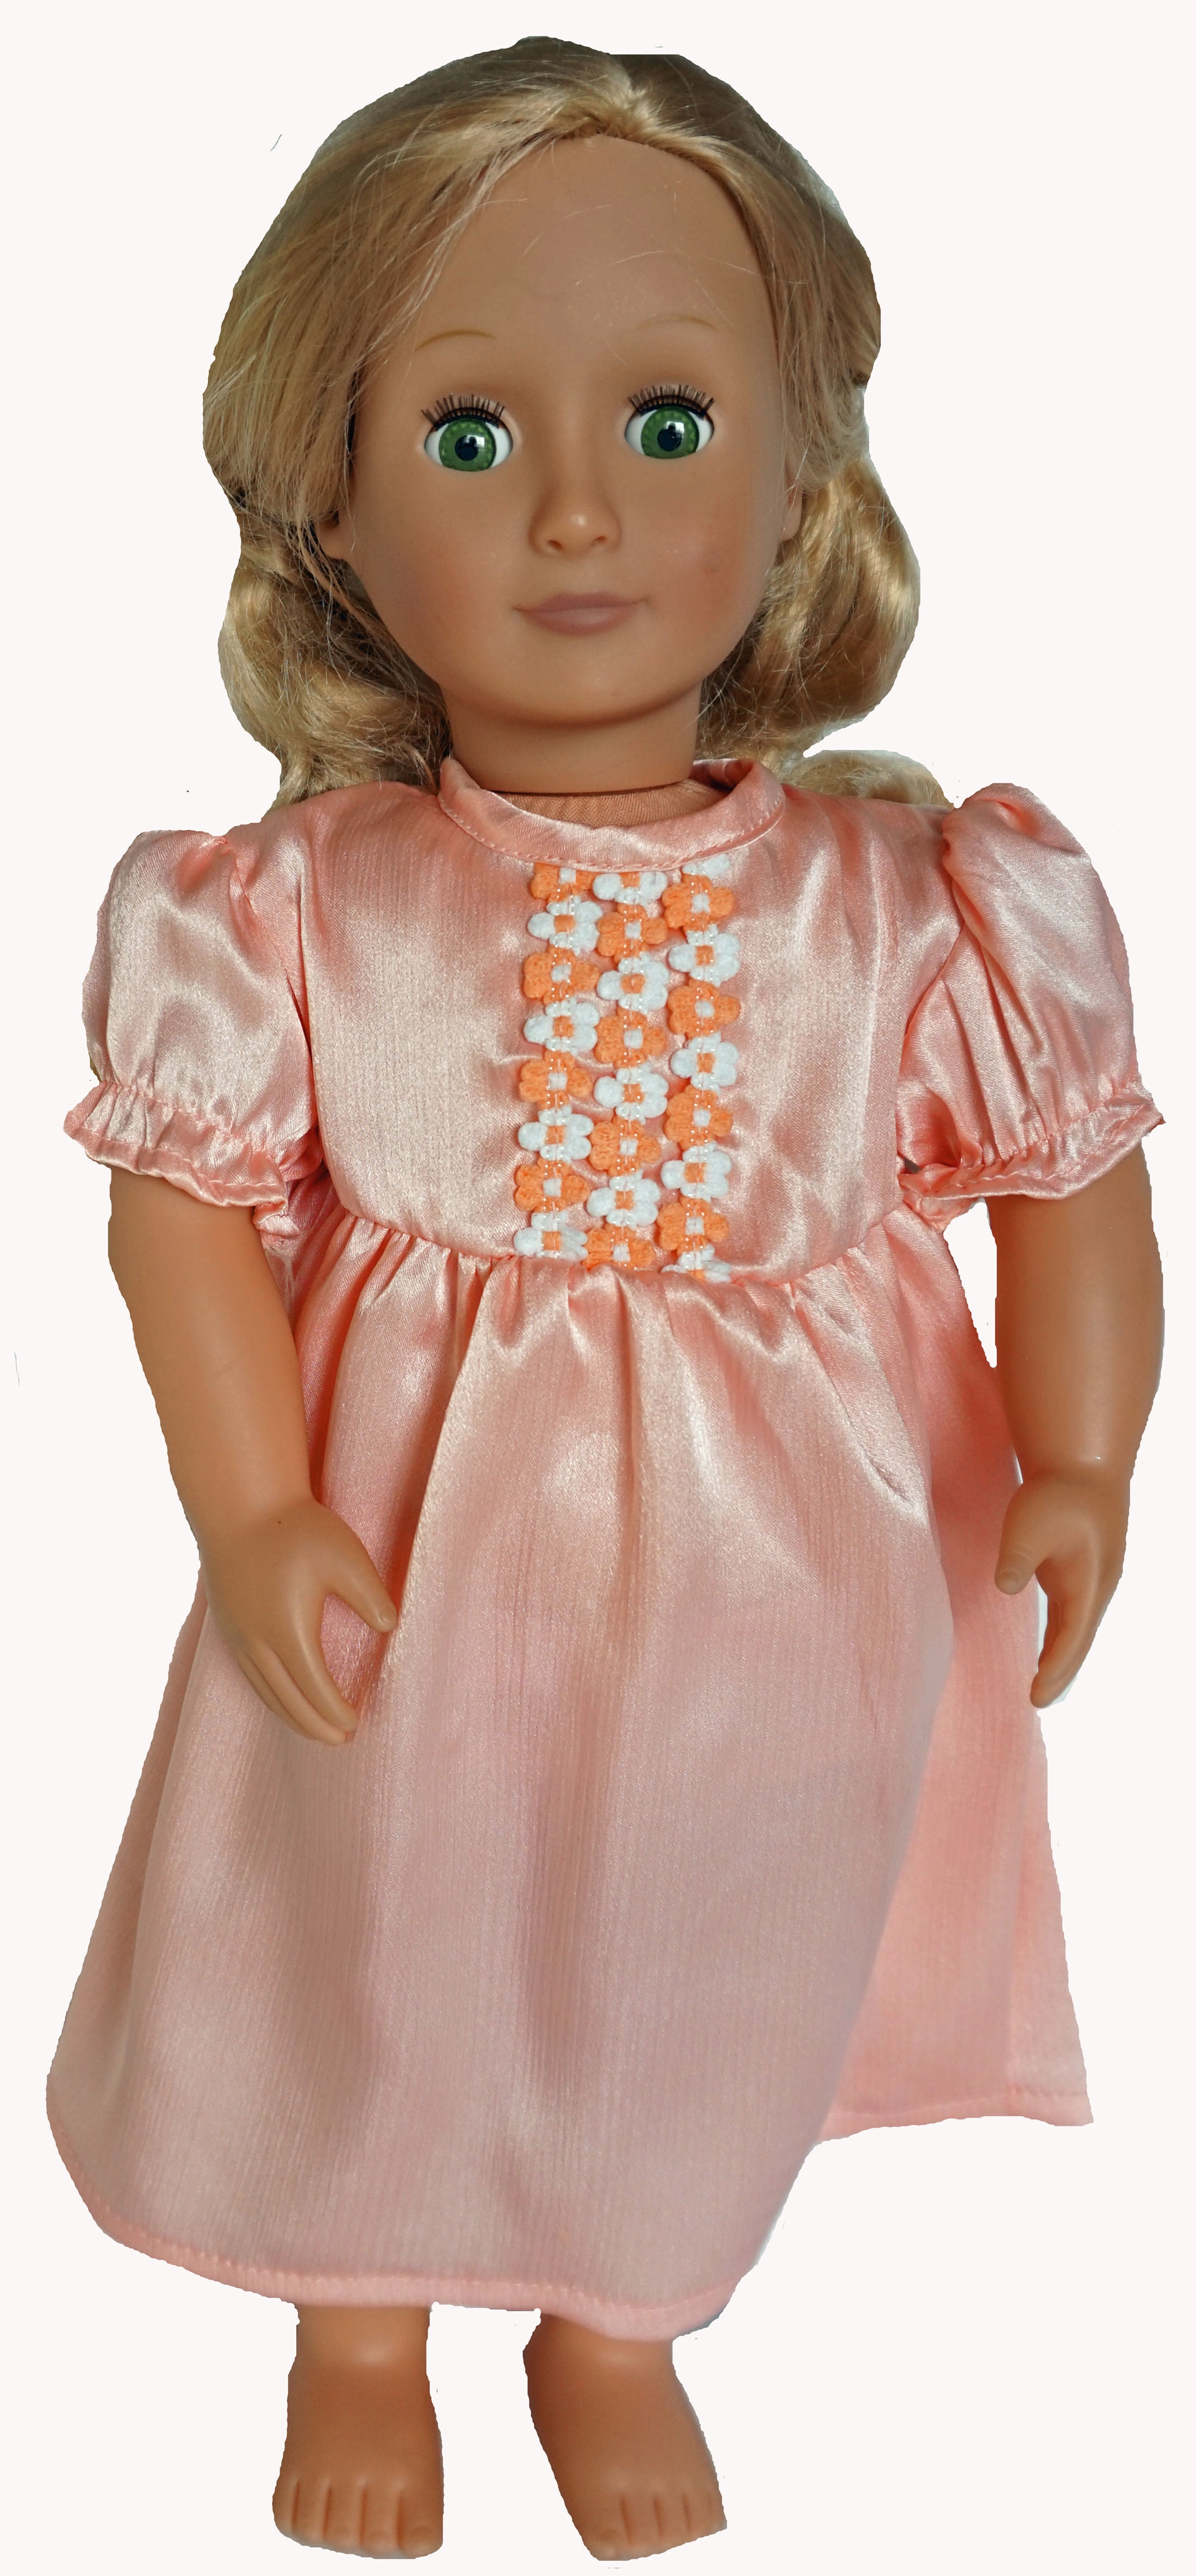 Doll Clothes Superstore Tangerine Nightgown Fits 18 Inch Girl Dolls Like American Girl 